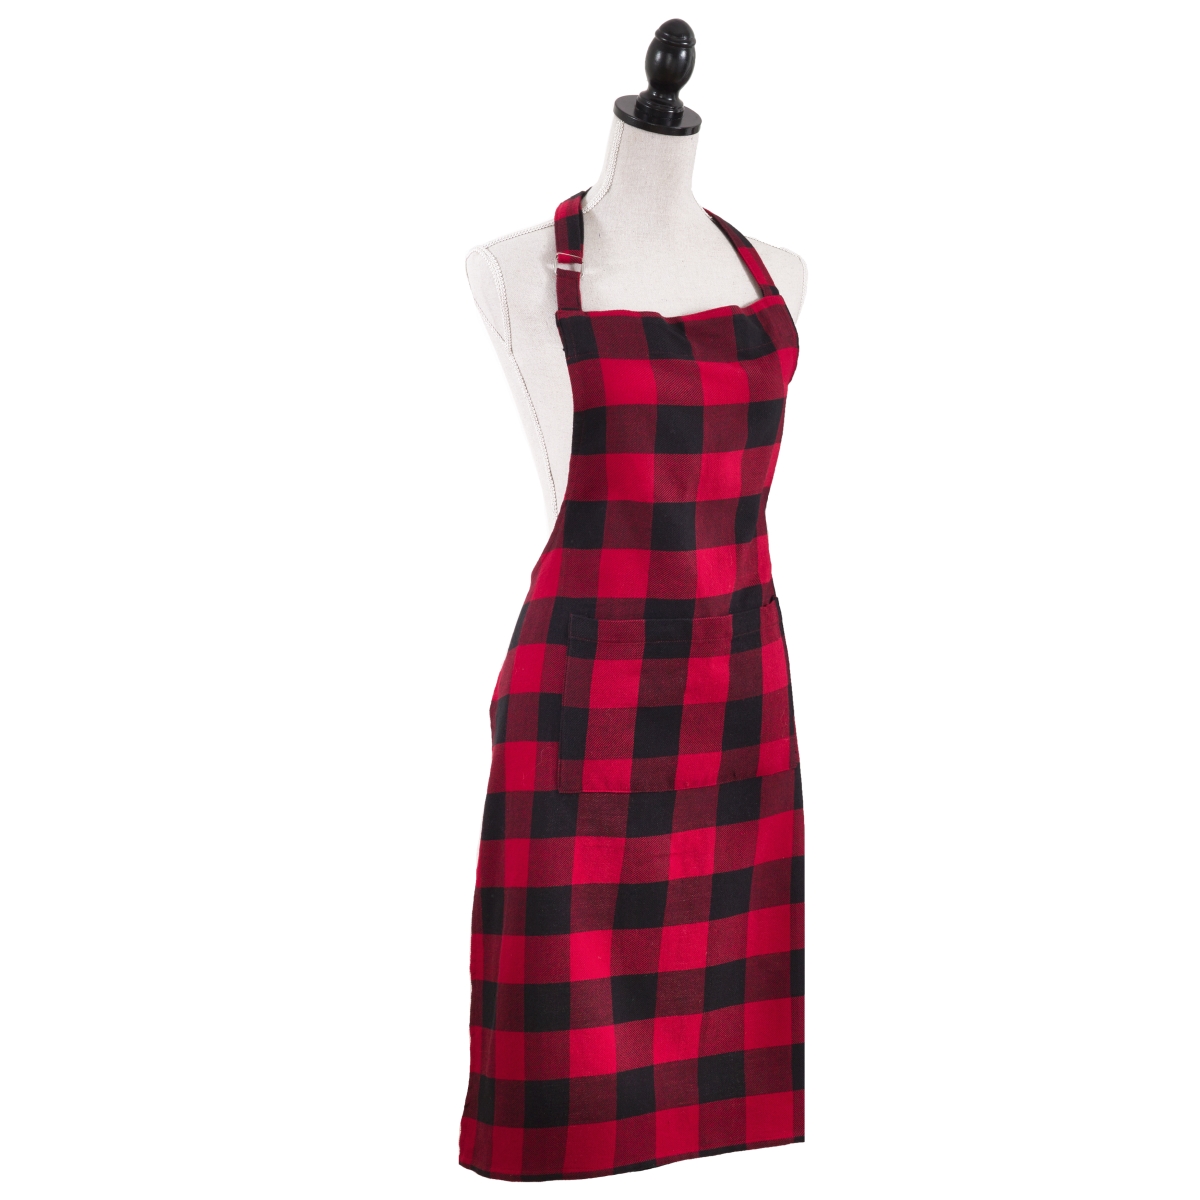 1030.r2436 24 X 36 In. Cotton Apron With Plaid Design, Red